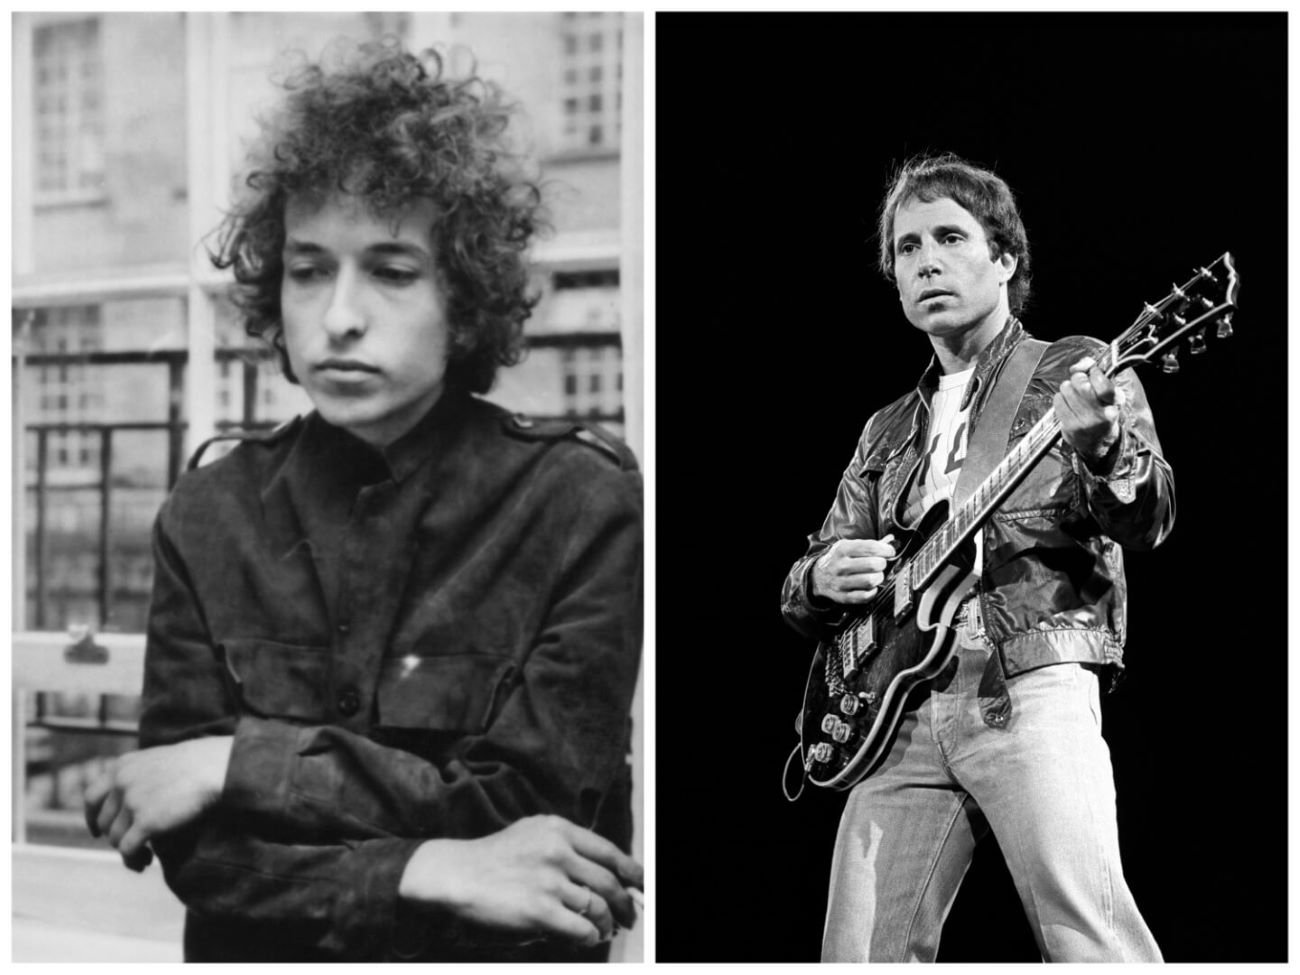 A black and white picture of Bob Dylan with his arms crossed in front of a window. A black and white picture of Paul Simon holding a guitar.